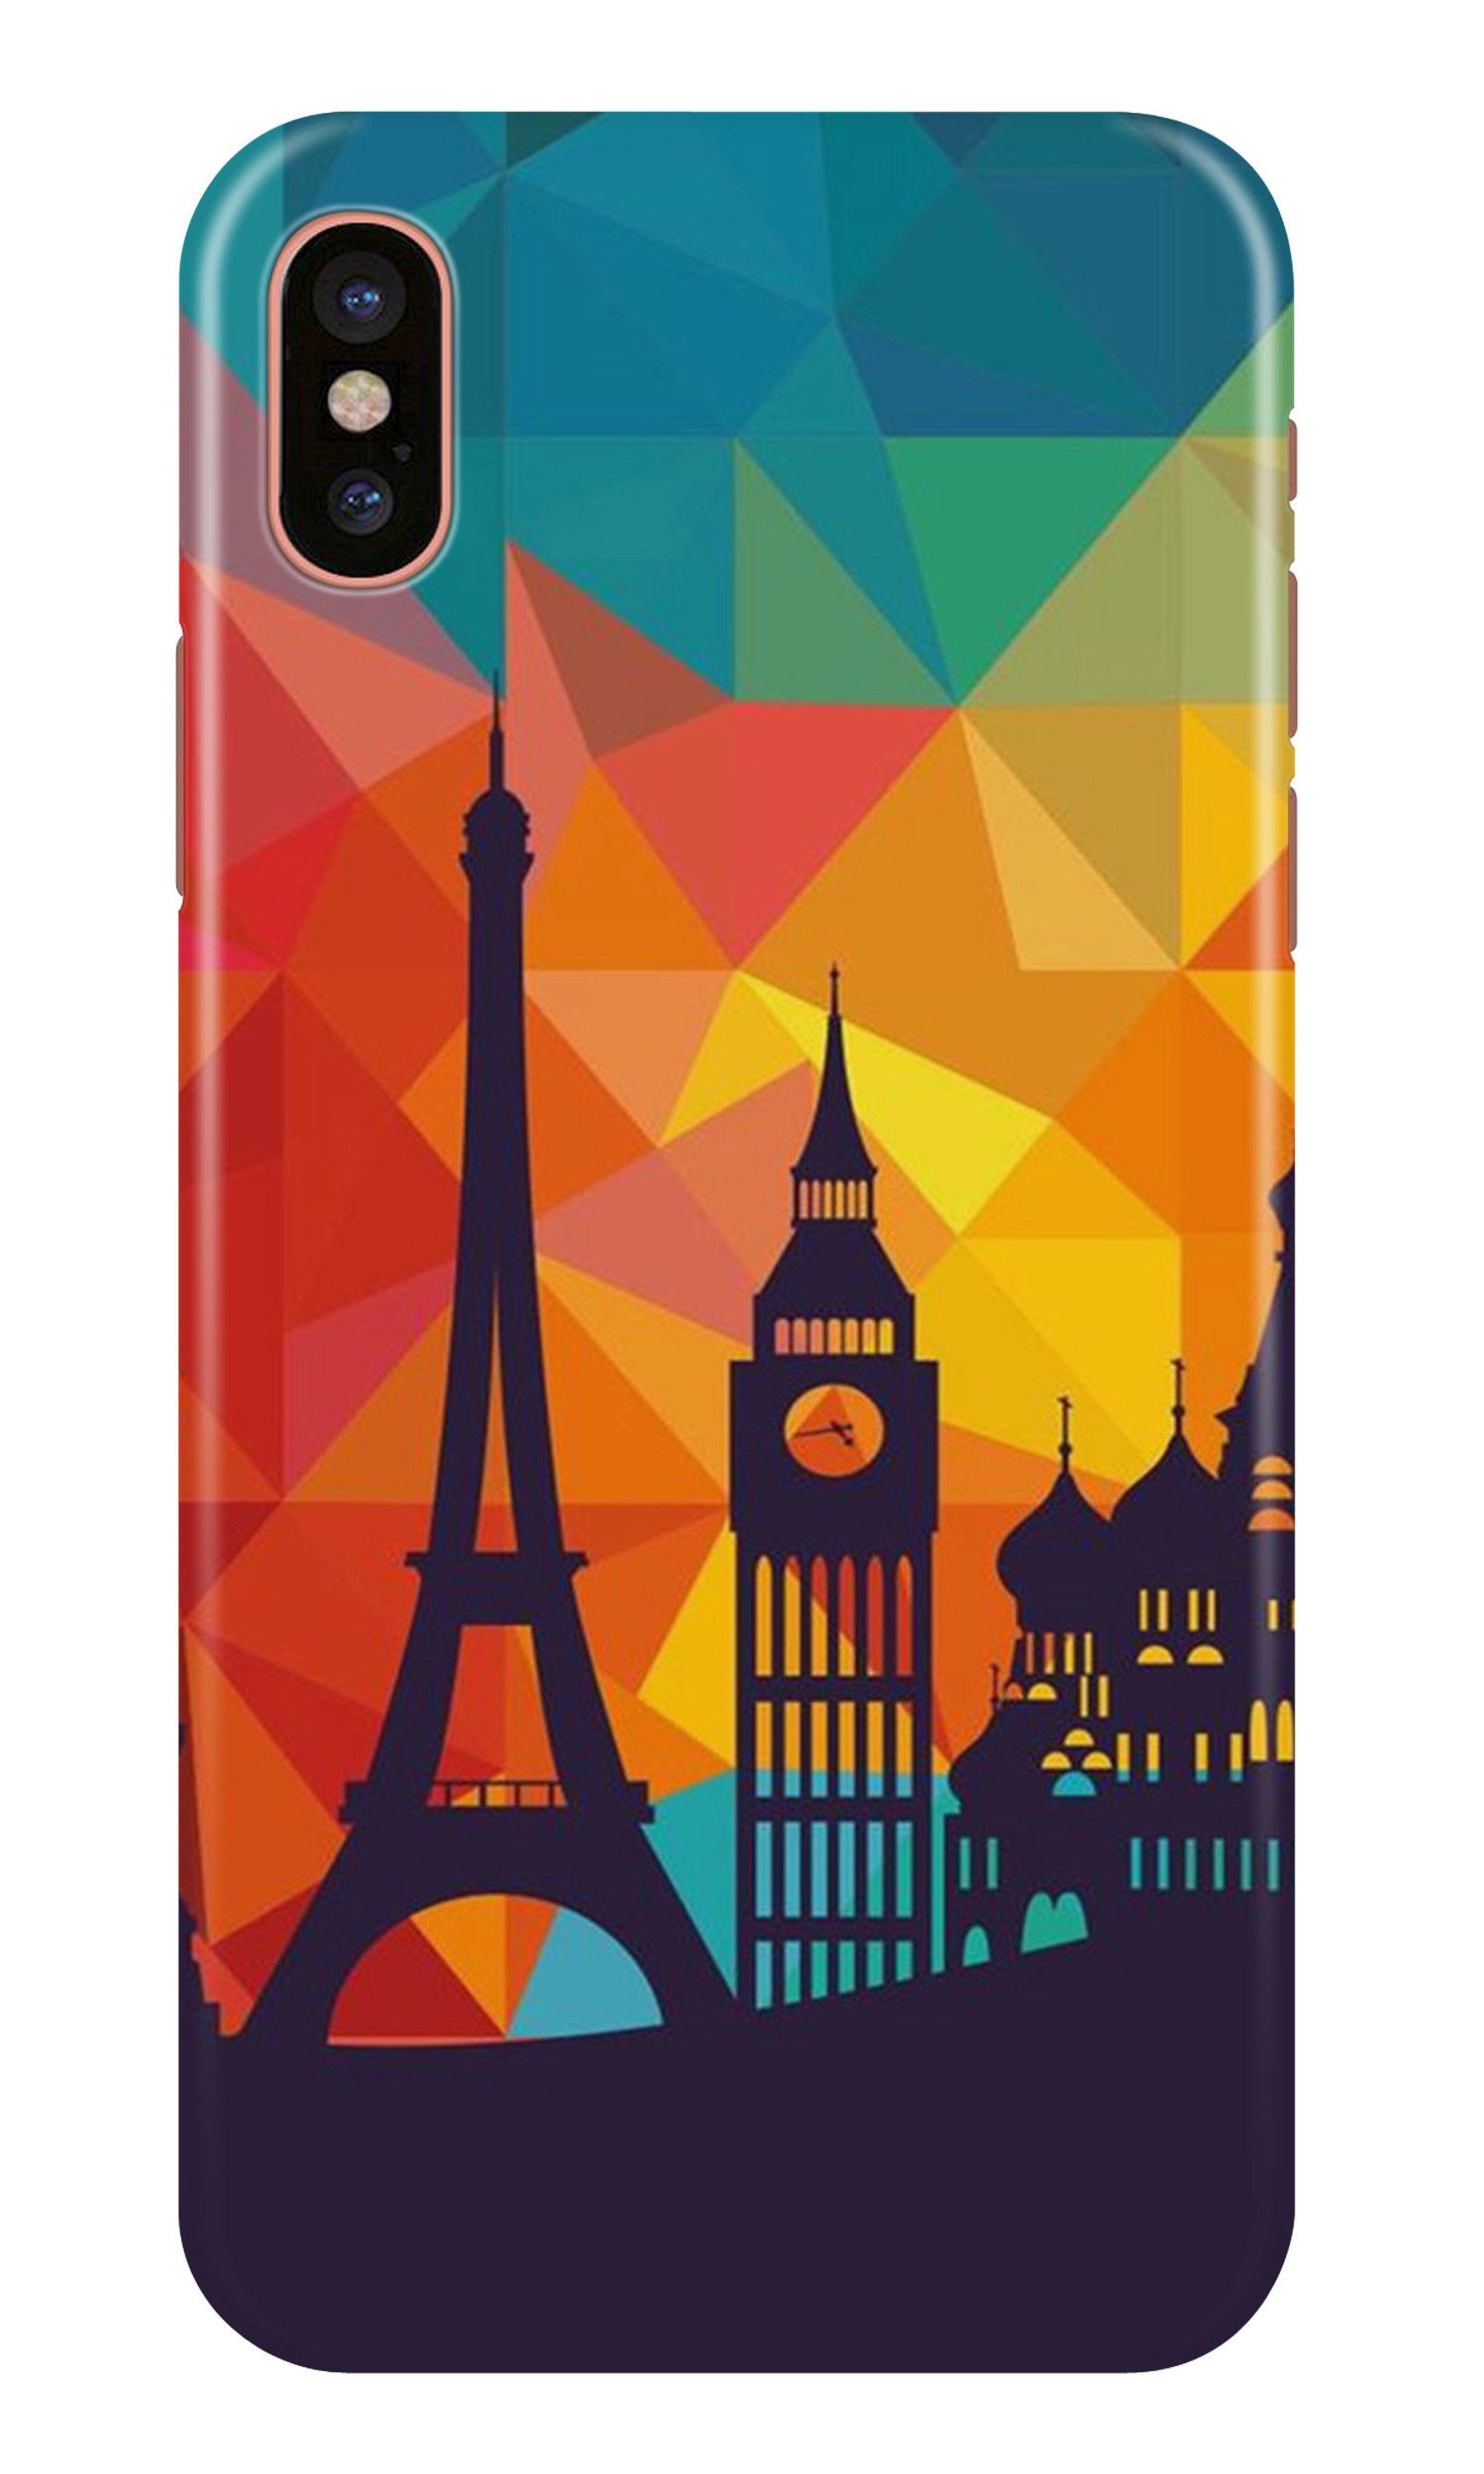 Eiffel Tower2 Case for iPhone X